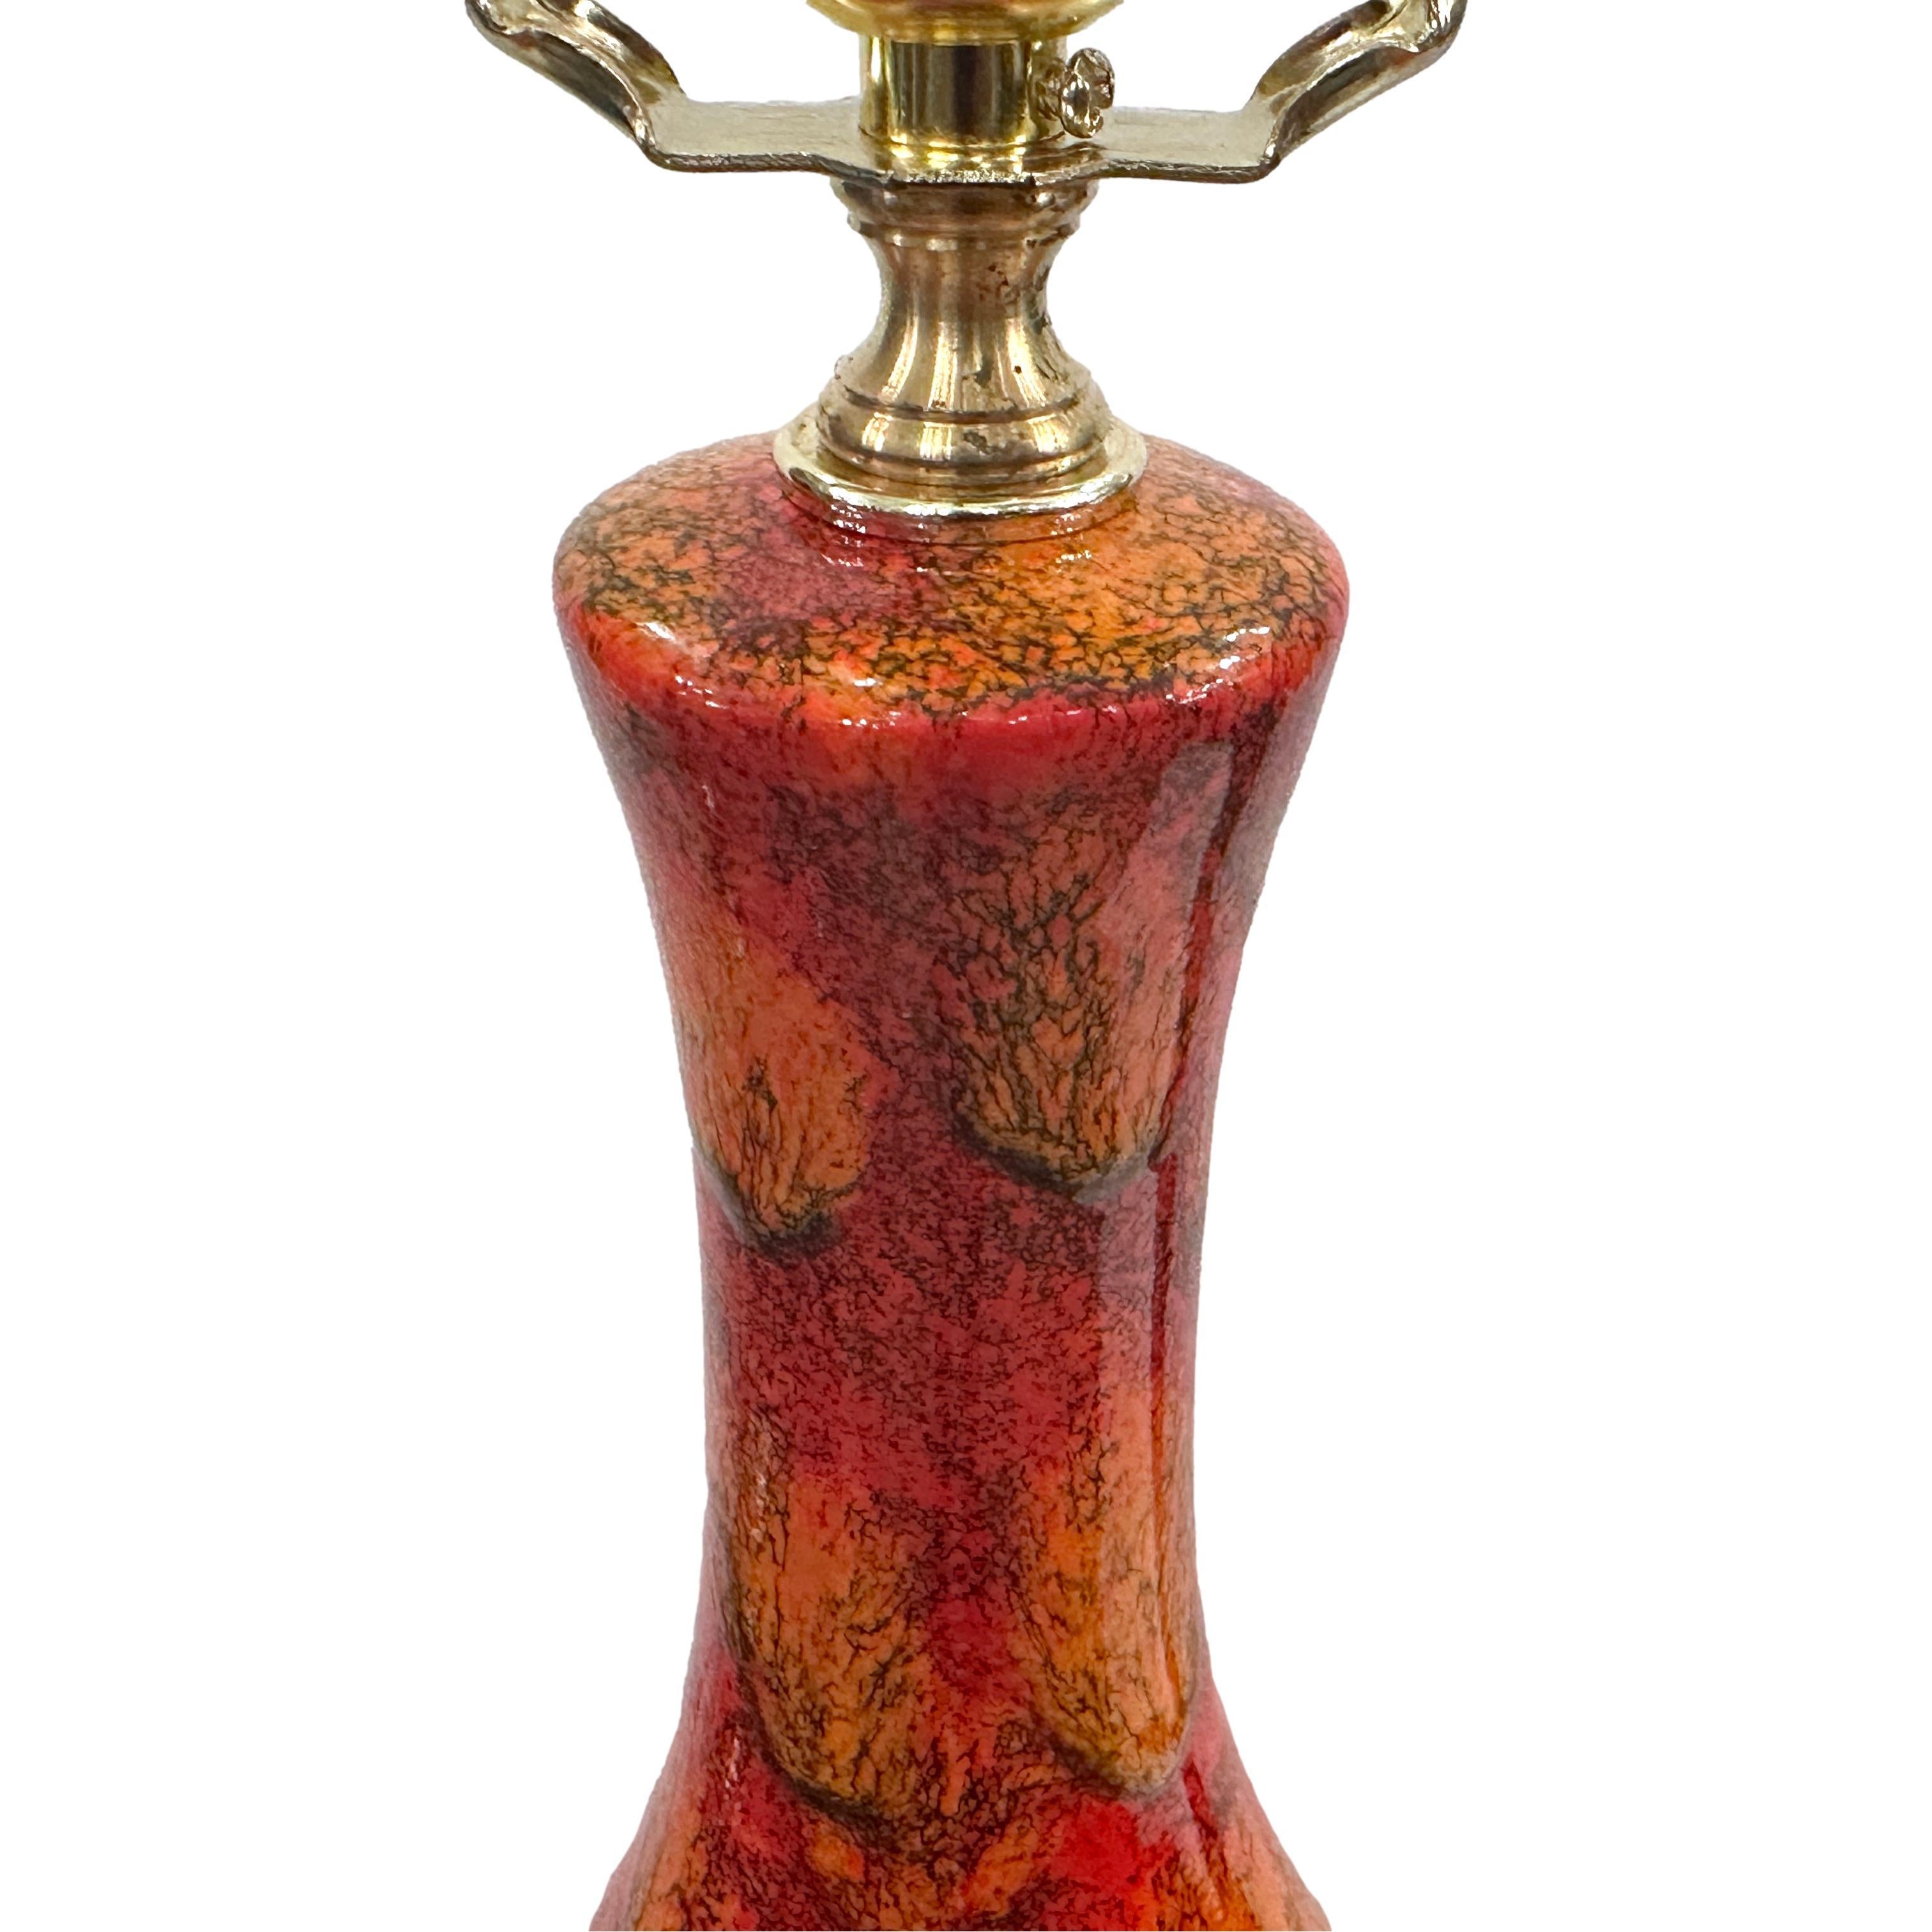 A circa 1960's Italian ceramic table lamp with red glazed finish.

Measurements:
Height of body: 19